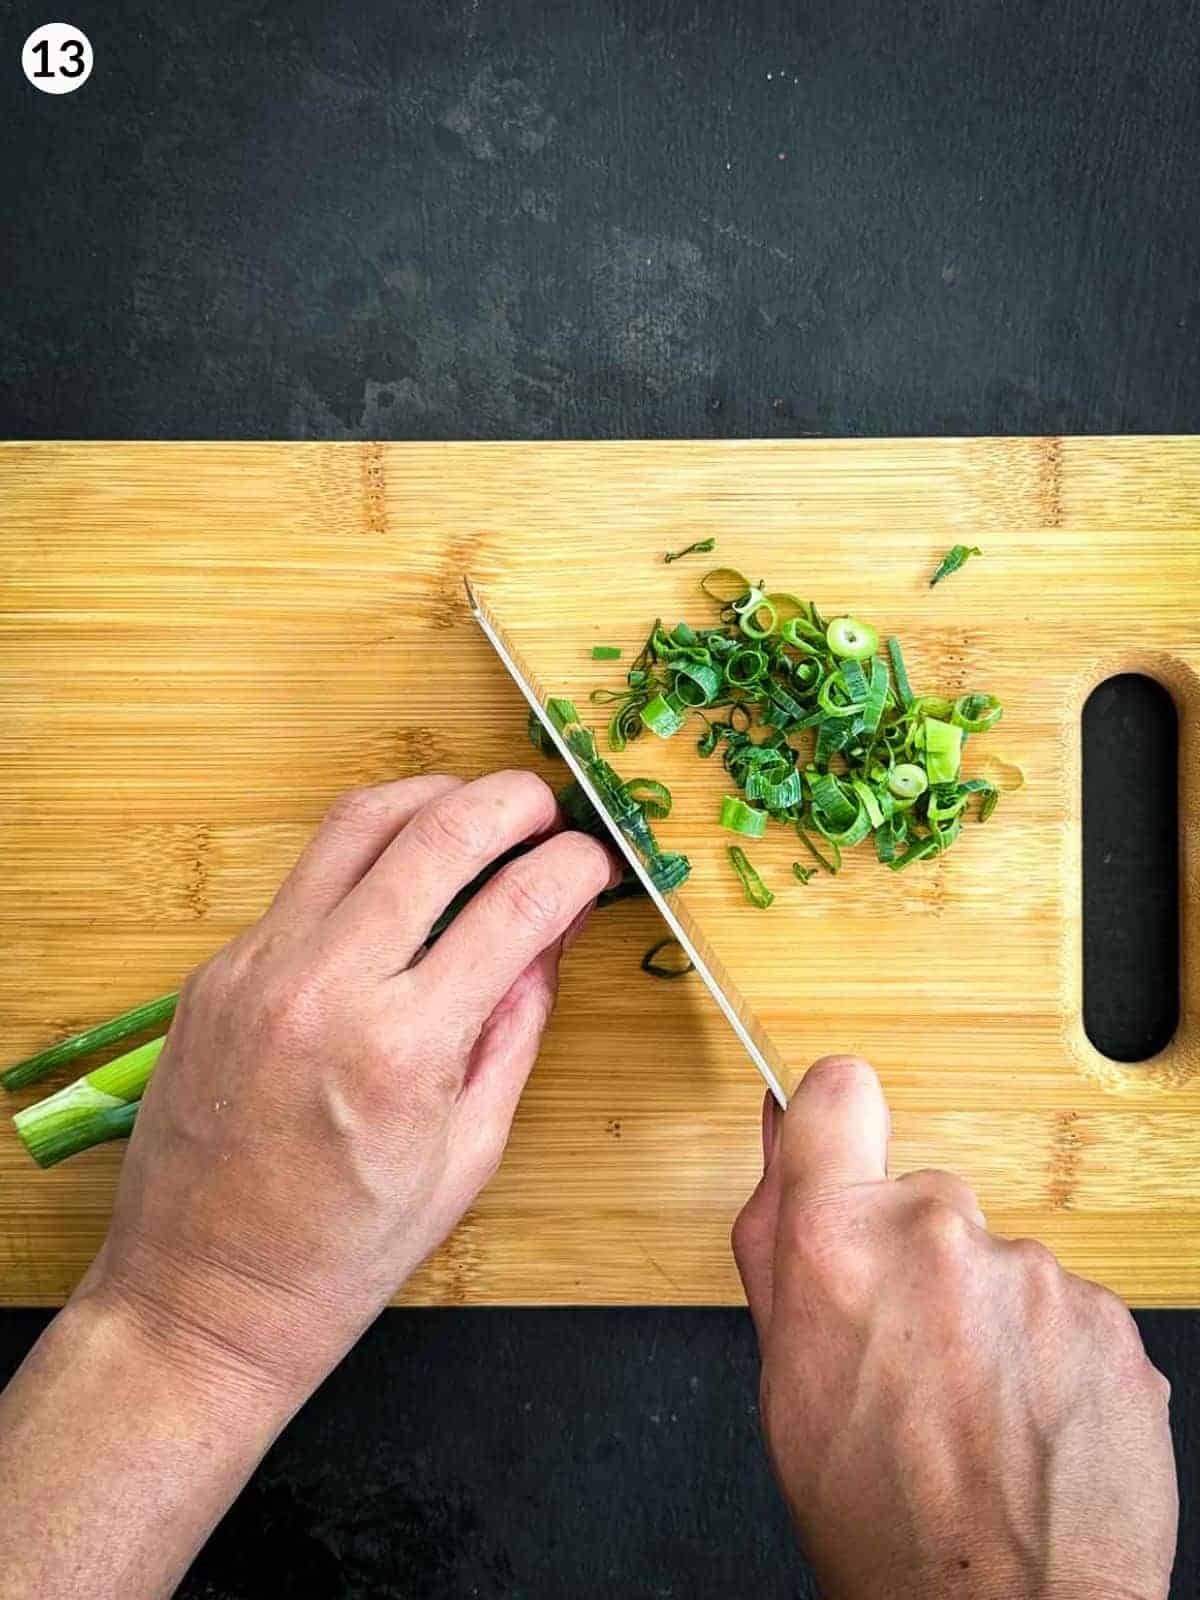 Chopping scallions with a knife on a wooden chopping board